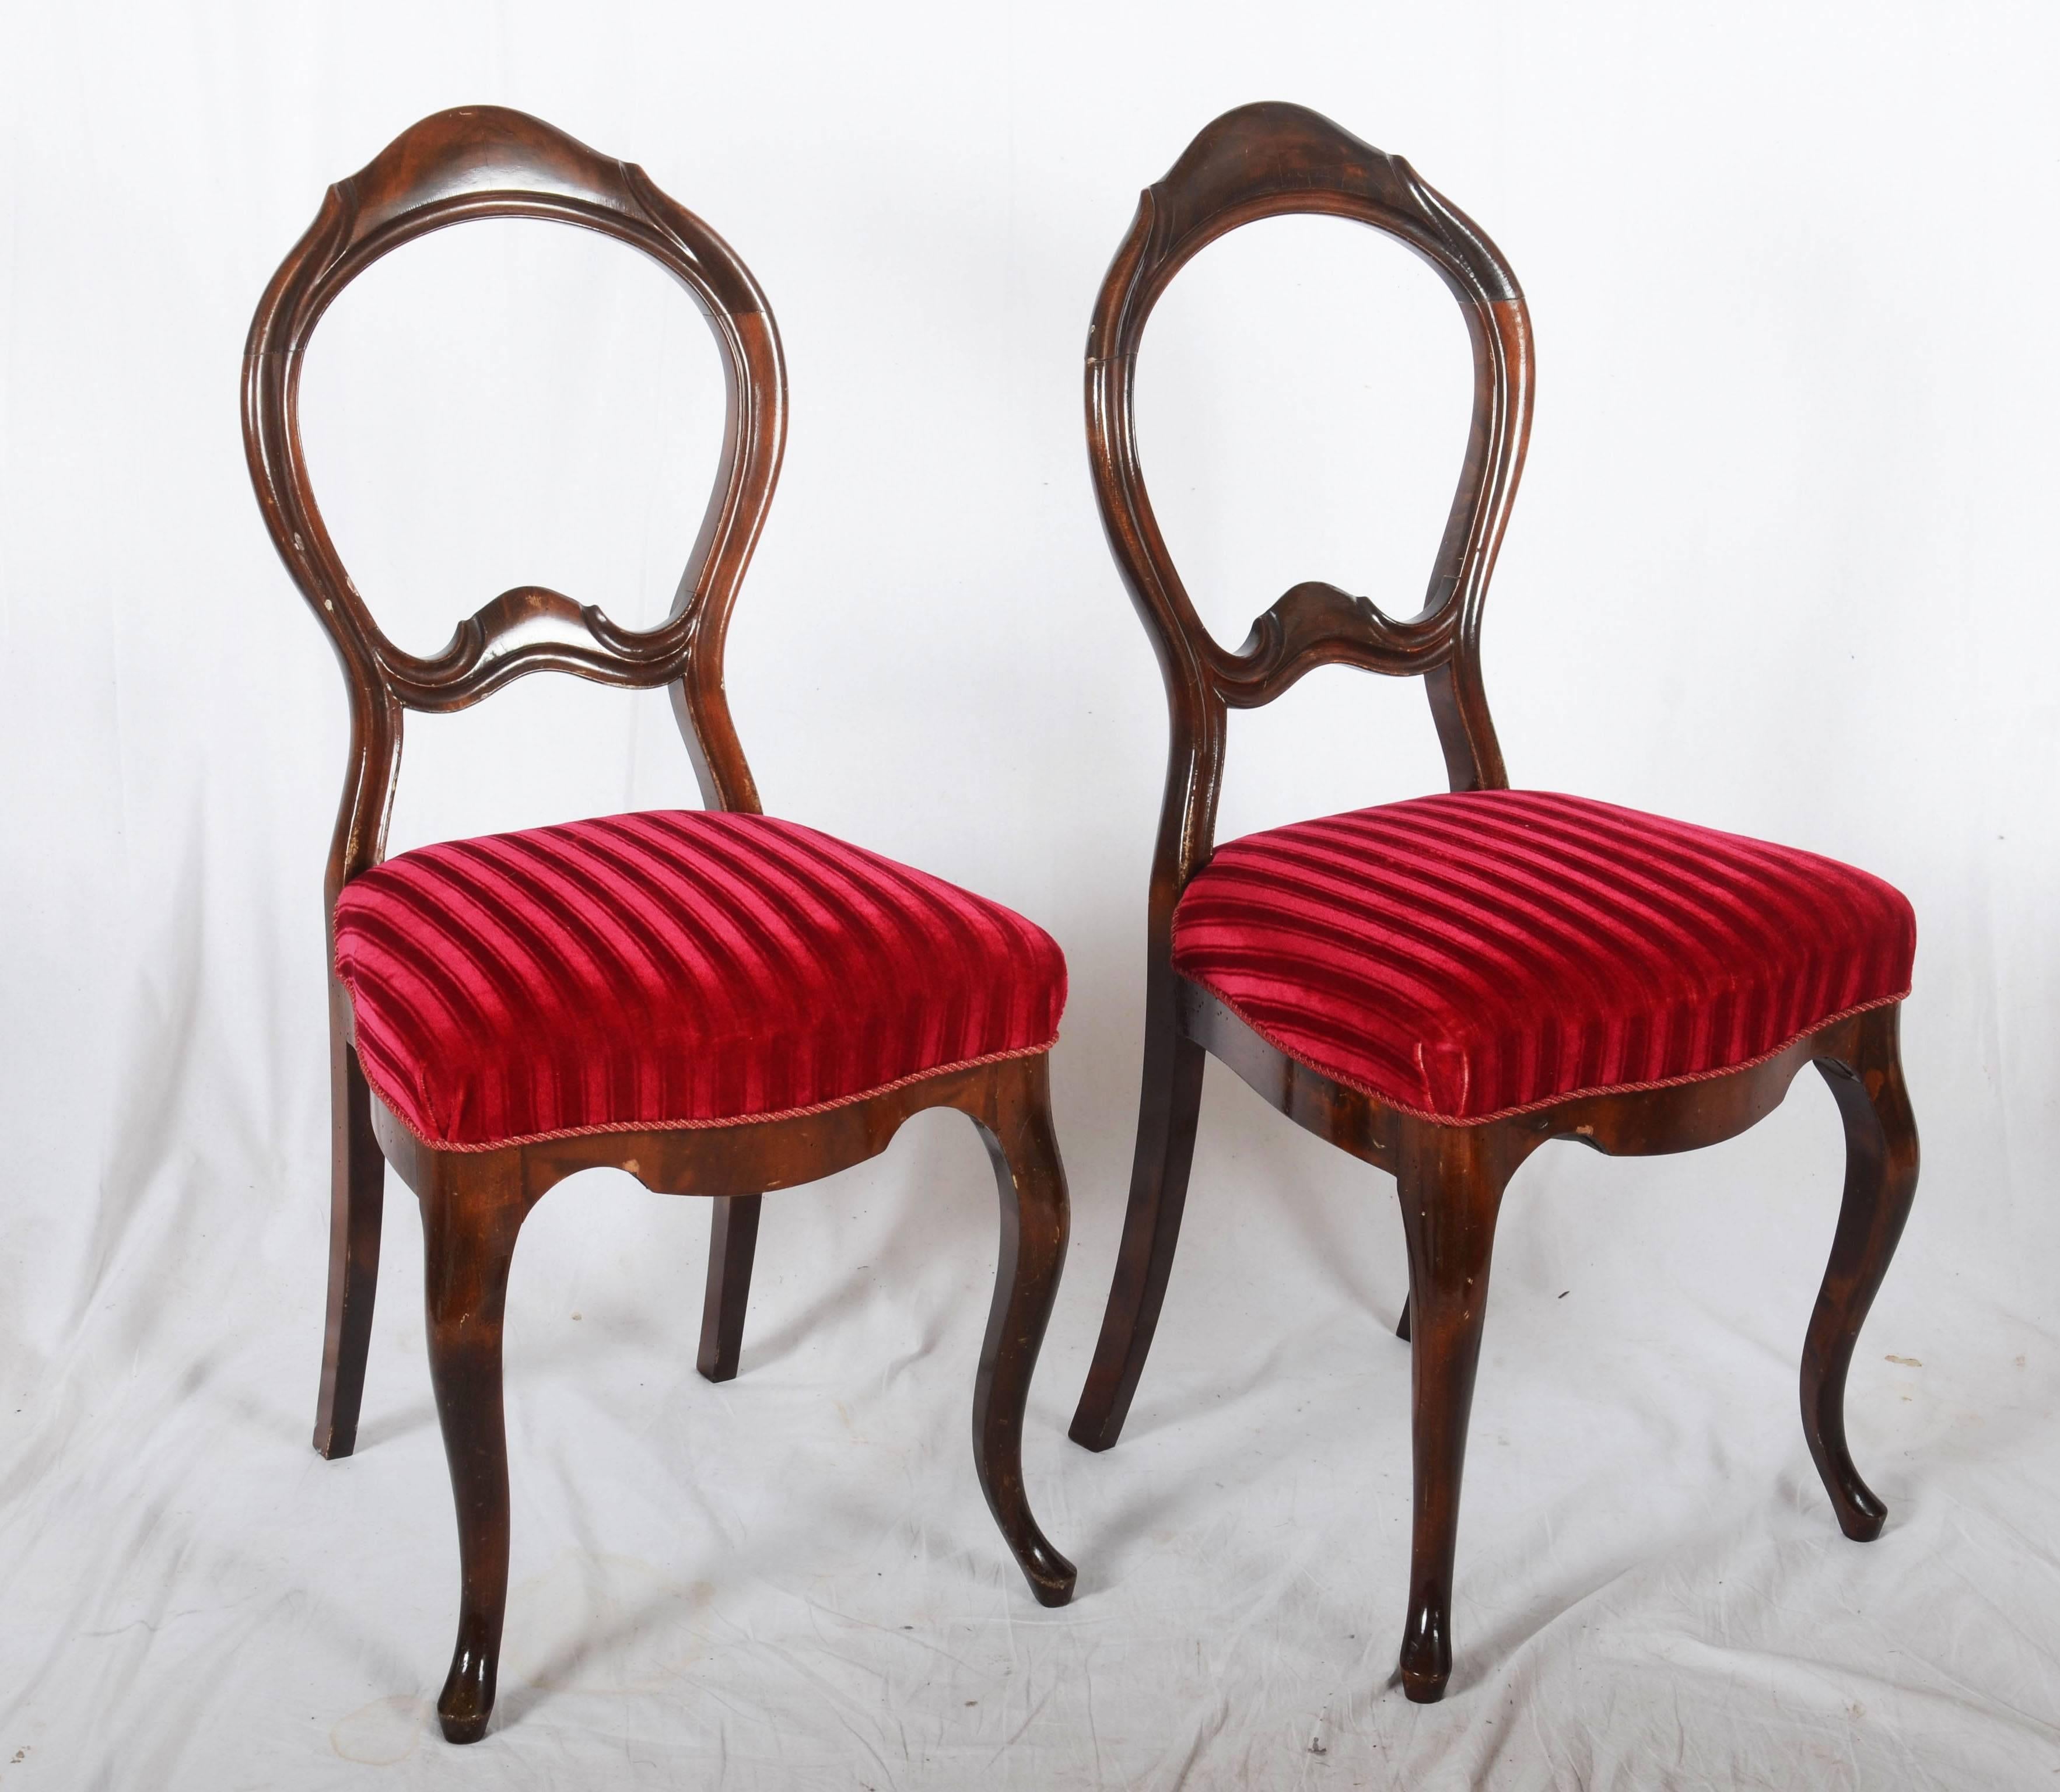 German Pair of Mahogany Chairs Form 1850s For Sale